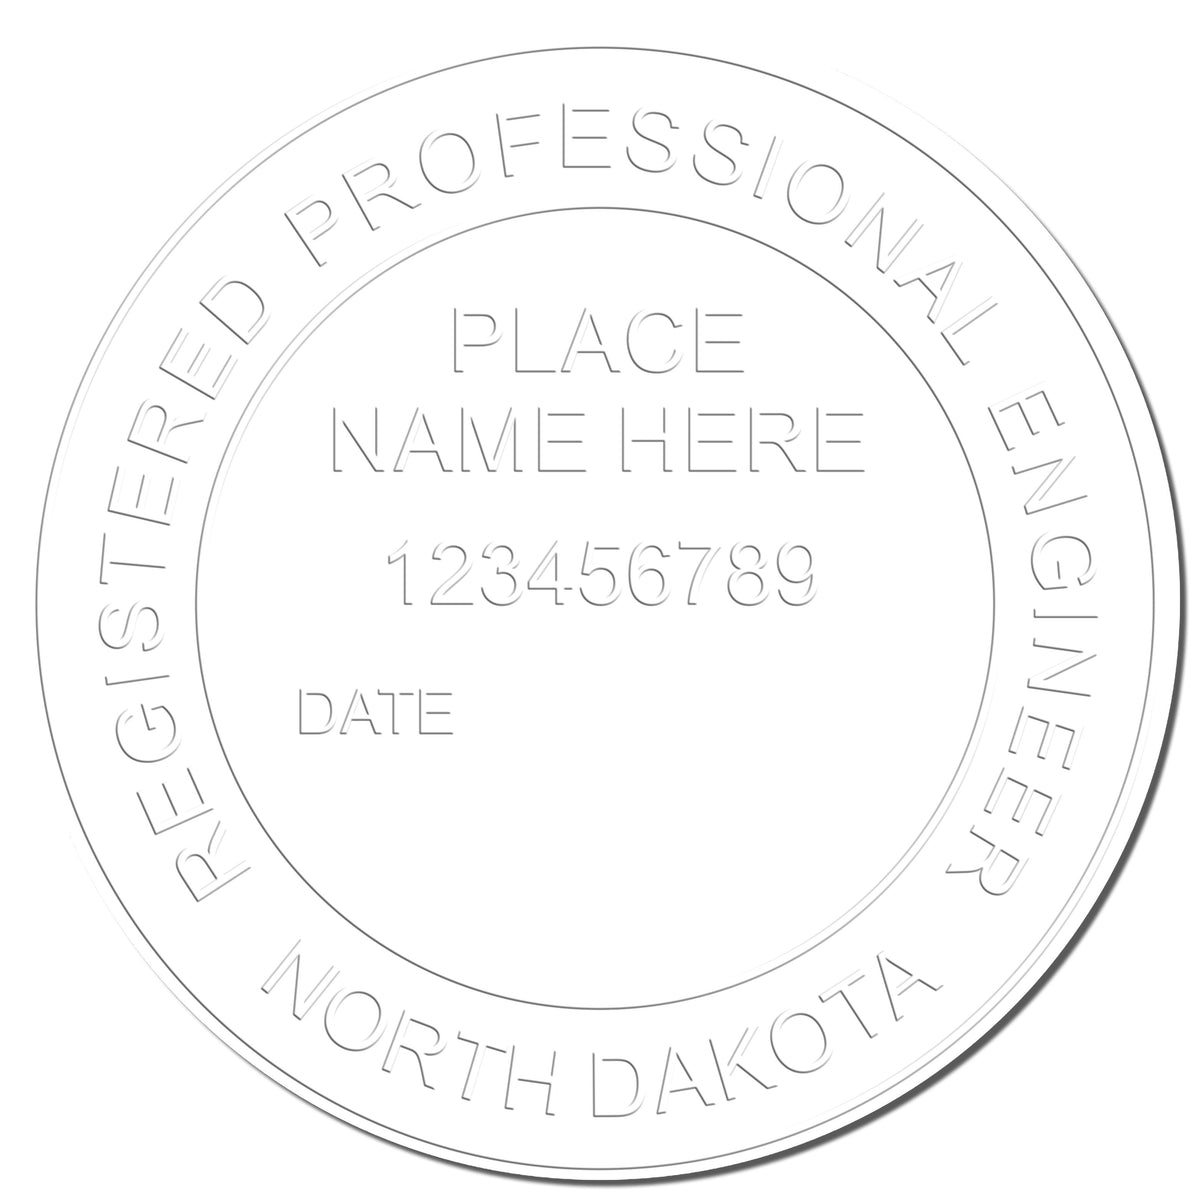 The Soft North Dakota Professional Engineer Seal stamp impression comes to life with a crisp, detailed photo on paper - showcasing true professional quality.